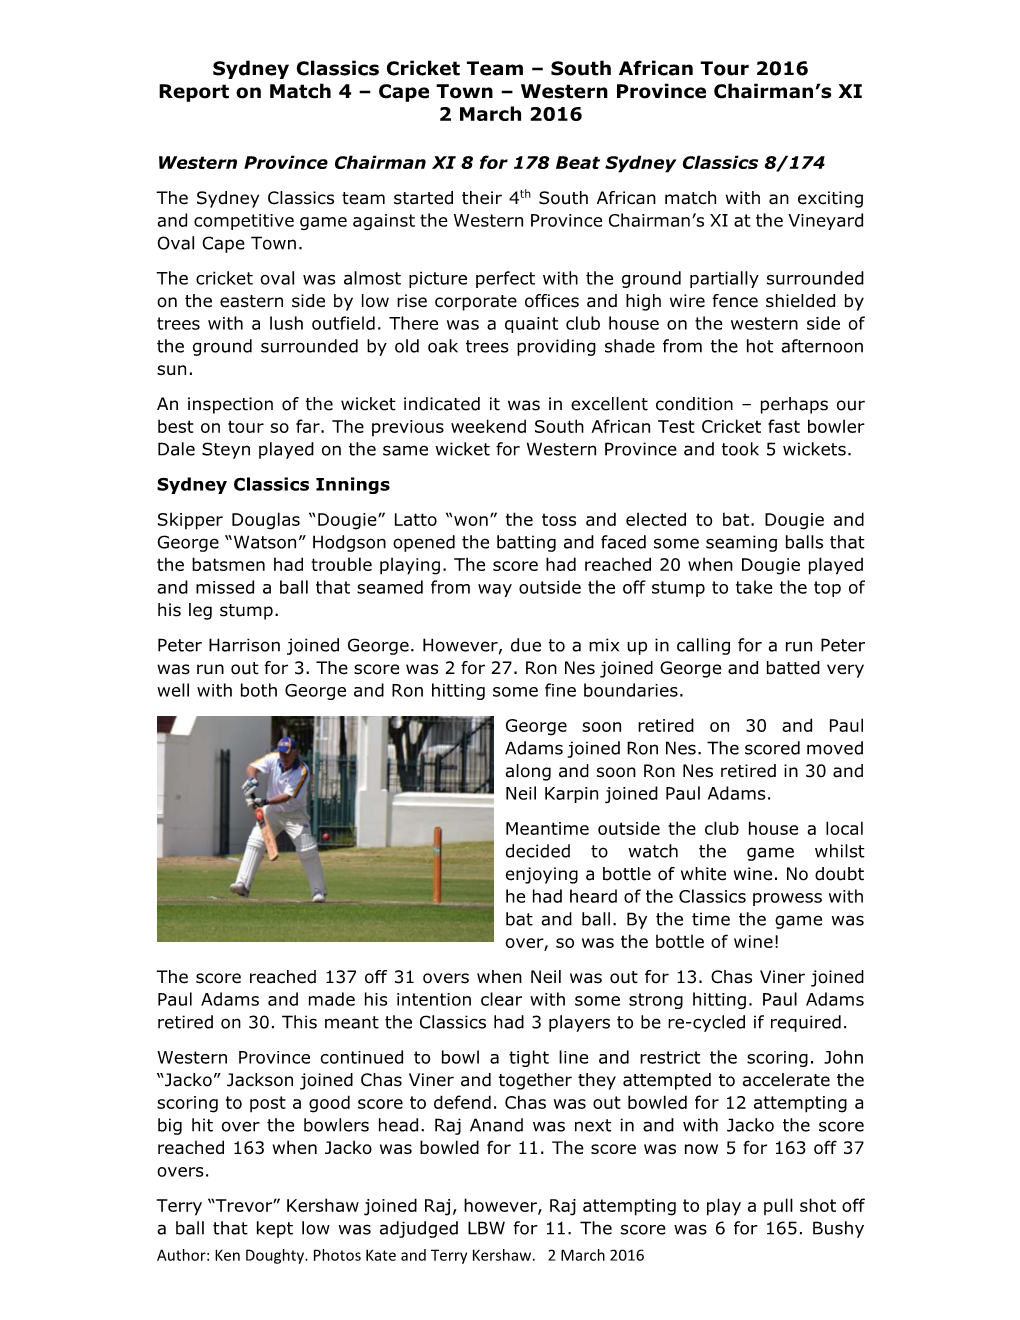 Sydney Classics Cricket Team – South African Tour 2016 Report on Match 4 – Cape Town – Western Province Chairman’S XI 2 March 2016